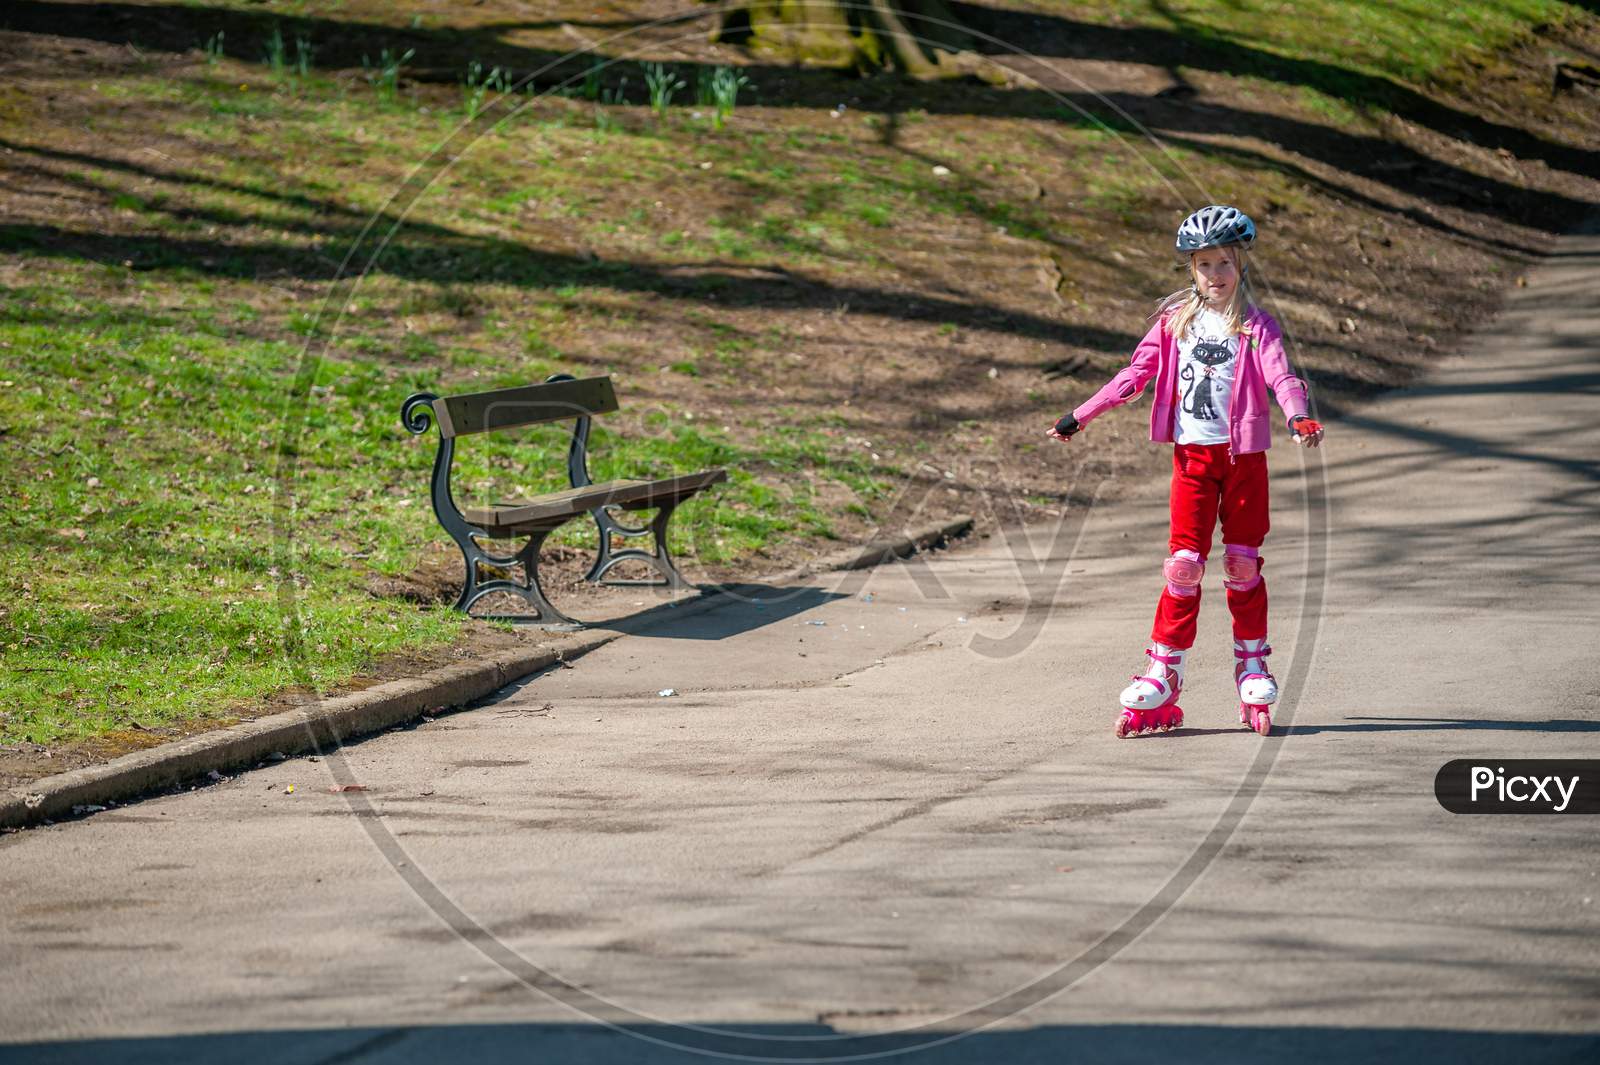 A Young Girl On Roller Blades Passes A Park Bench